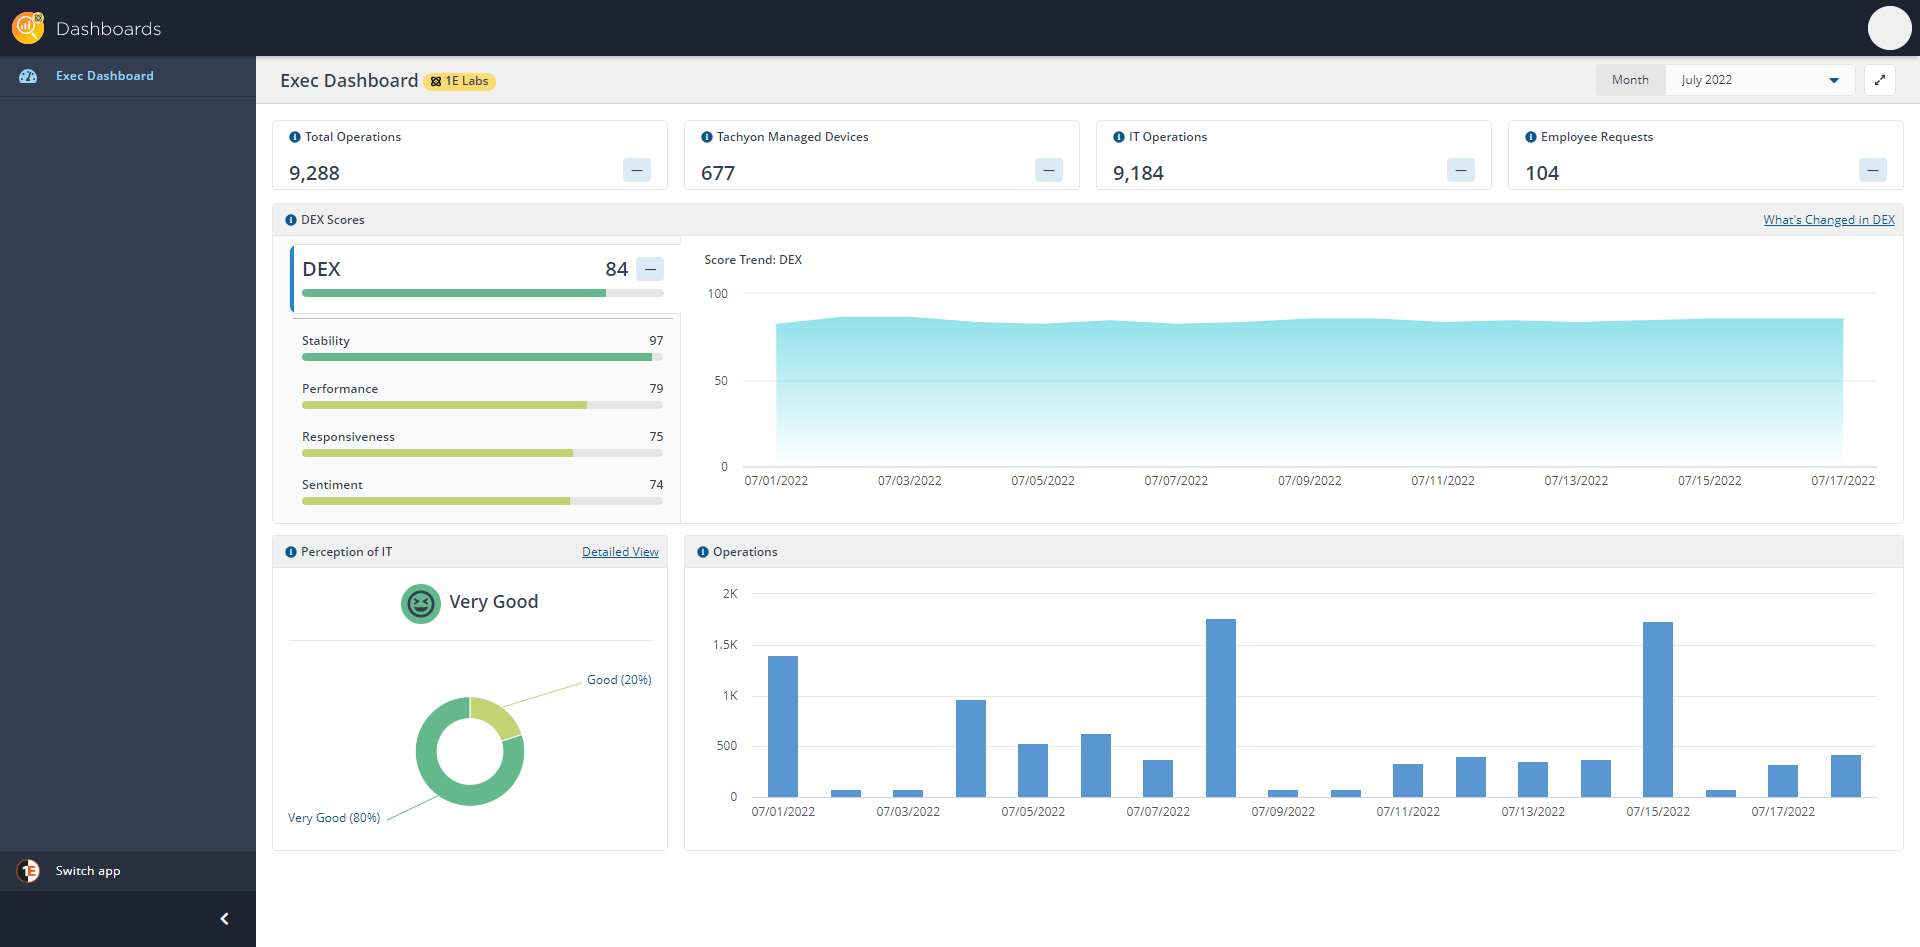 Exec Dashboards Overview